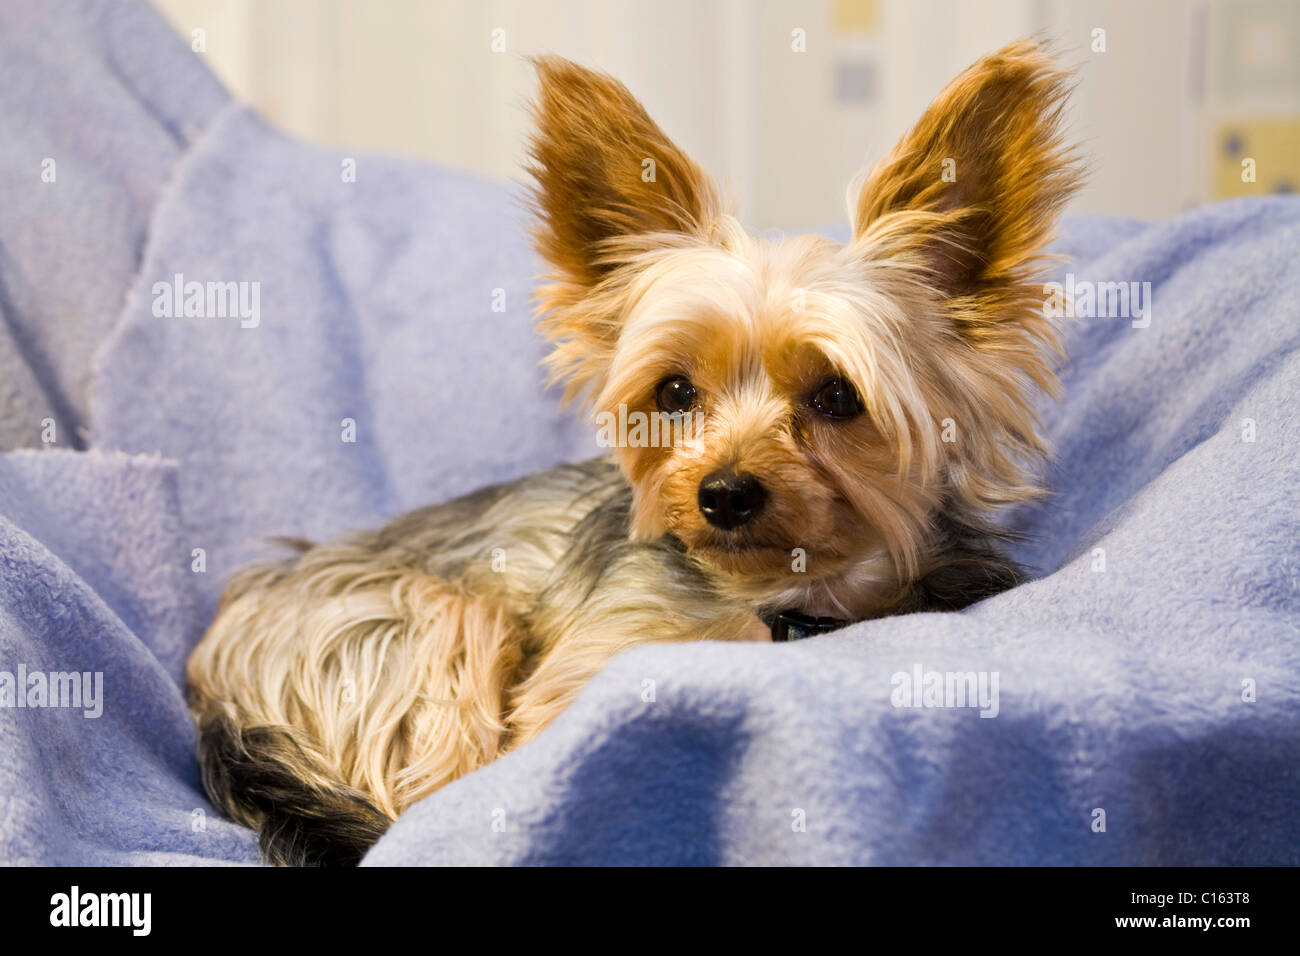 Yorkshire Terrier in the dog basket Stock Photo